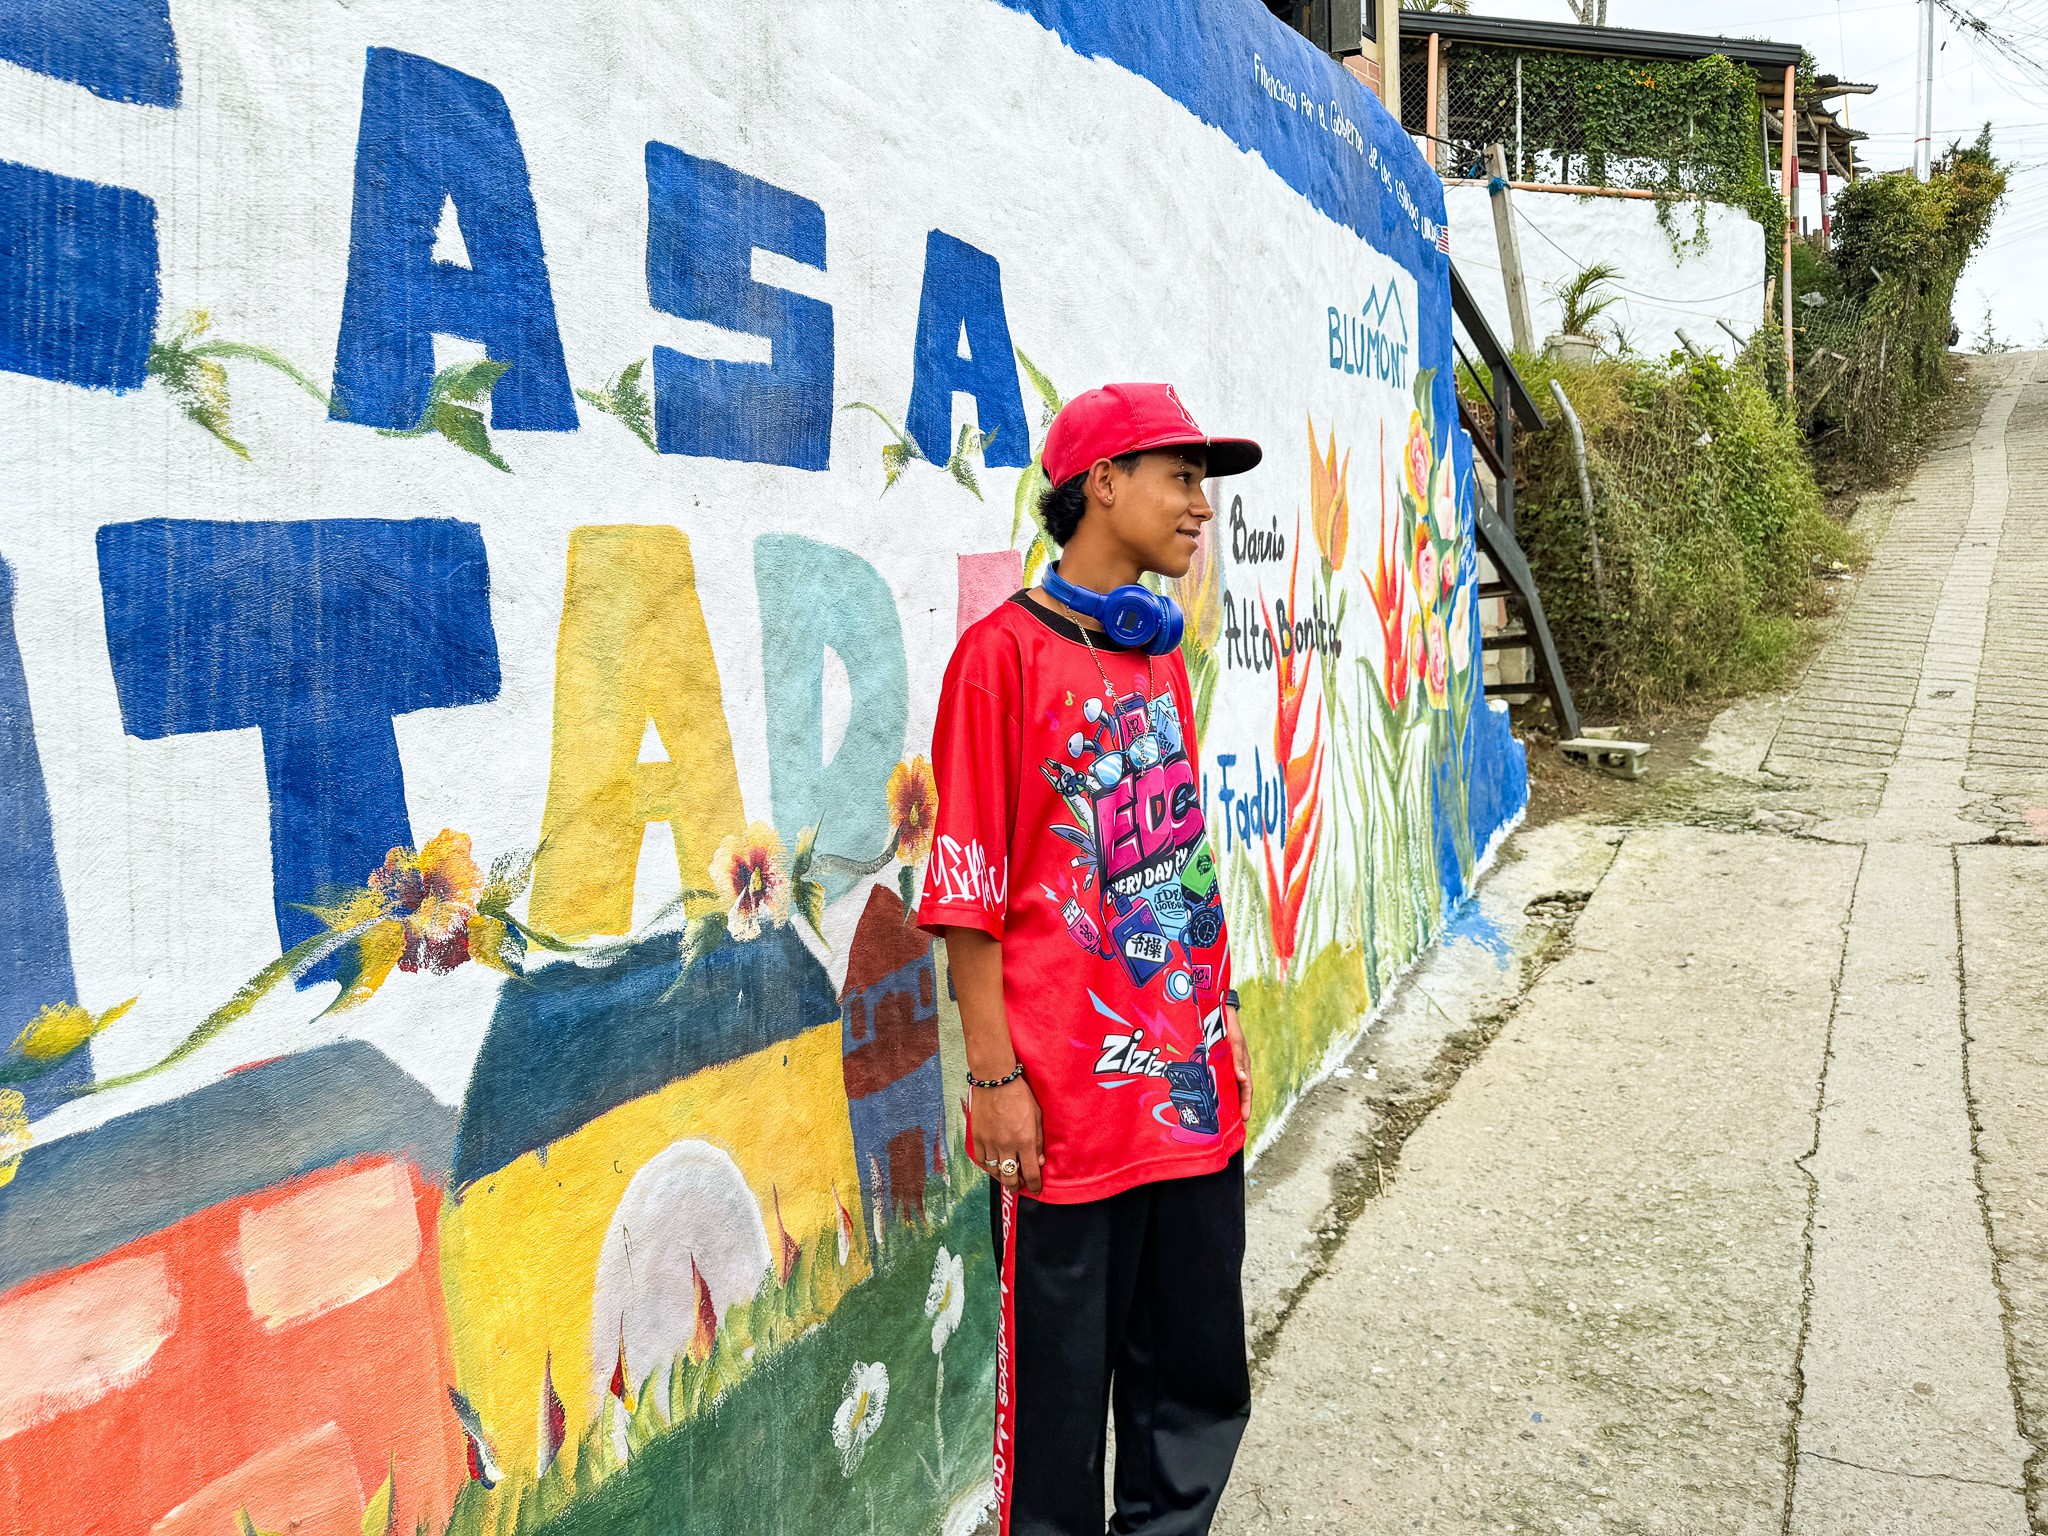 Teenagers in Colombia Share Message of Community and Friendship through Song “La Casa Pintada”